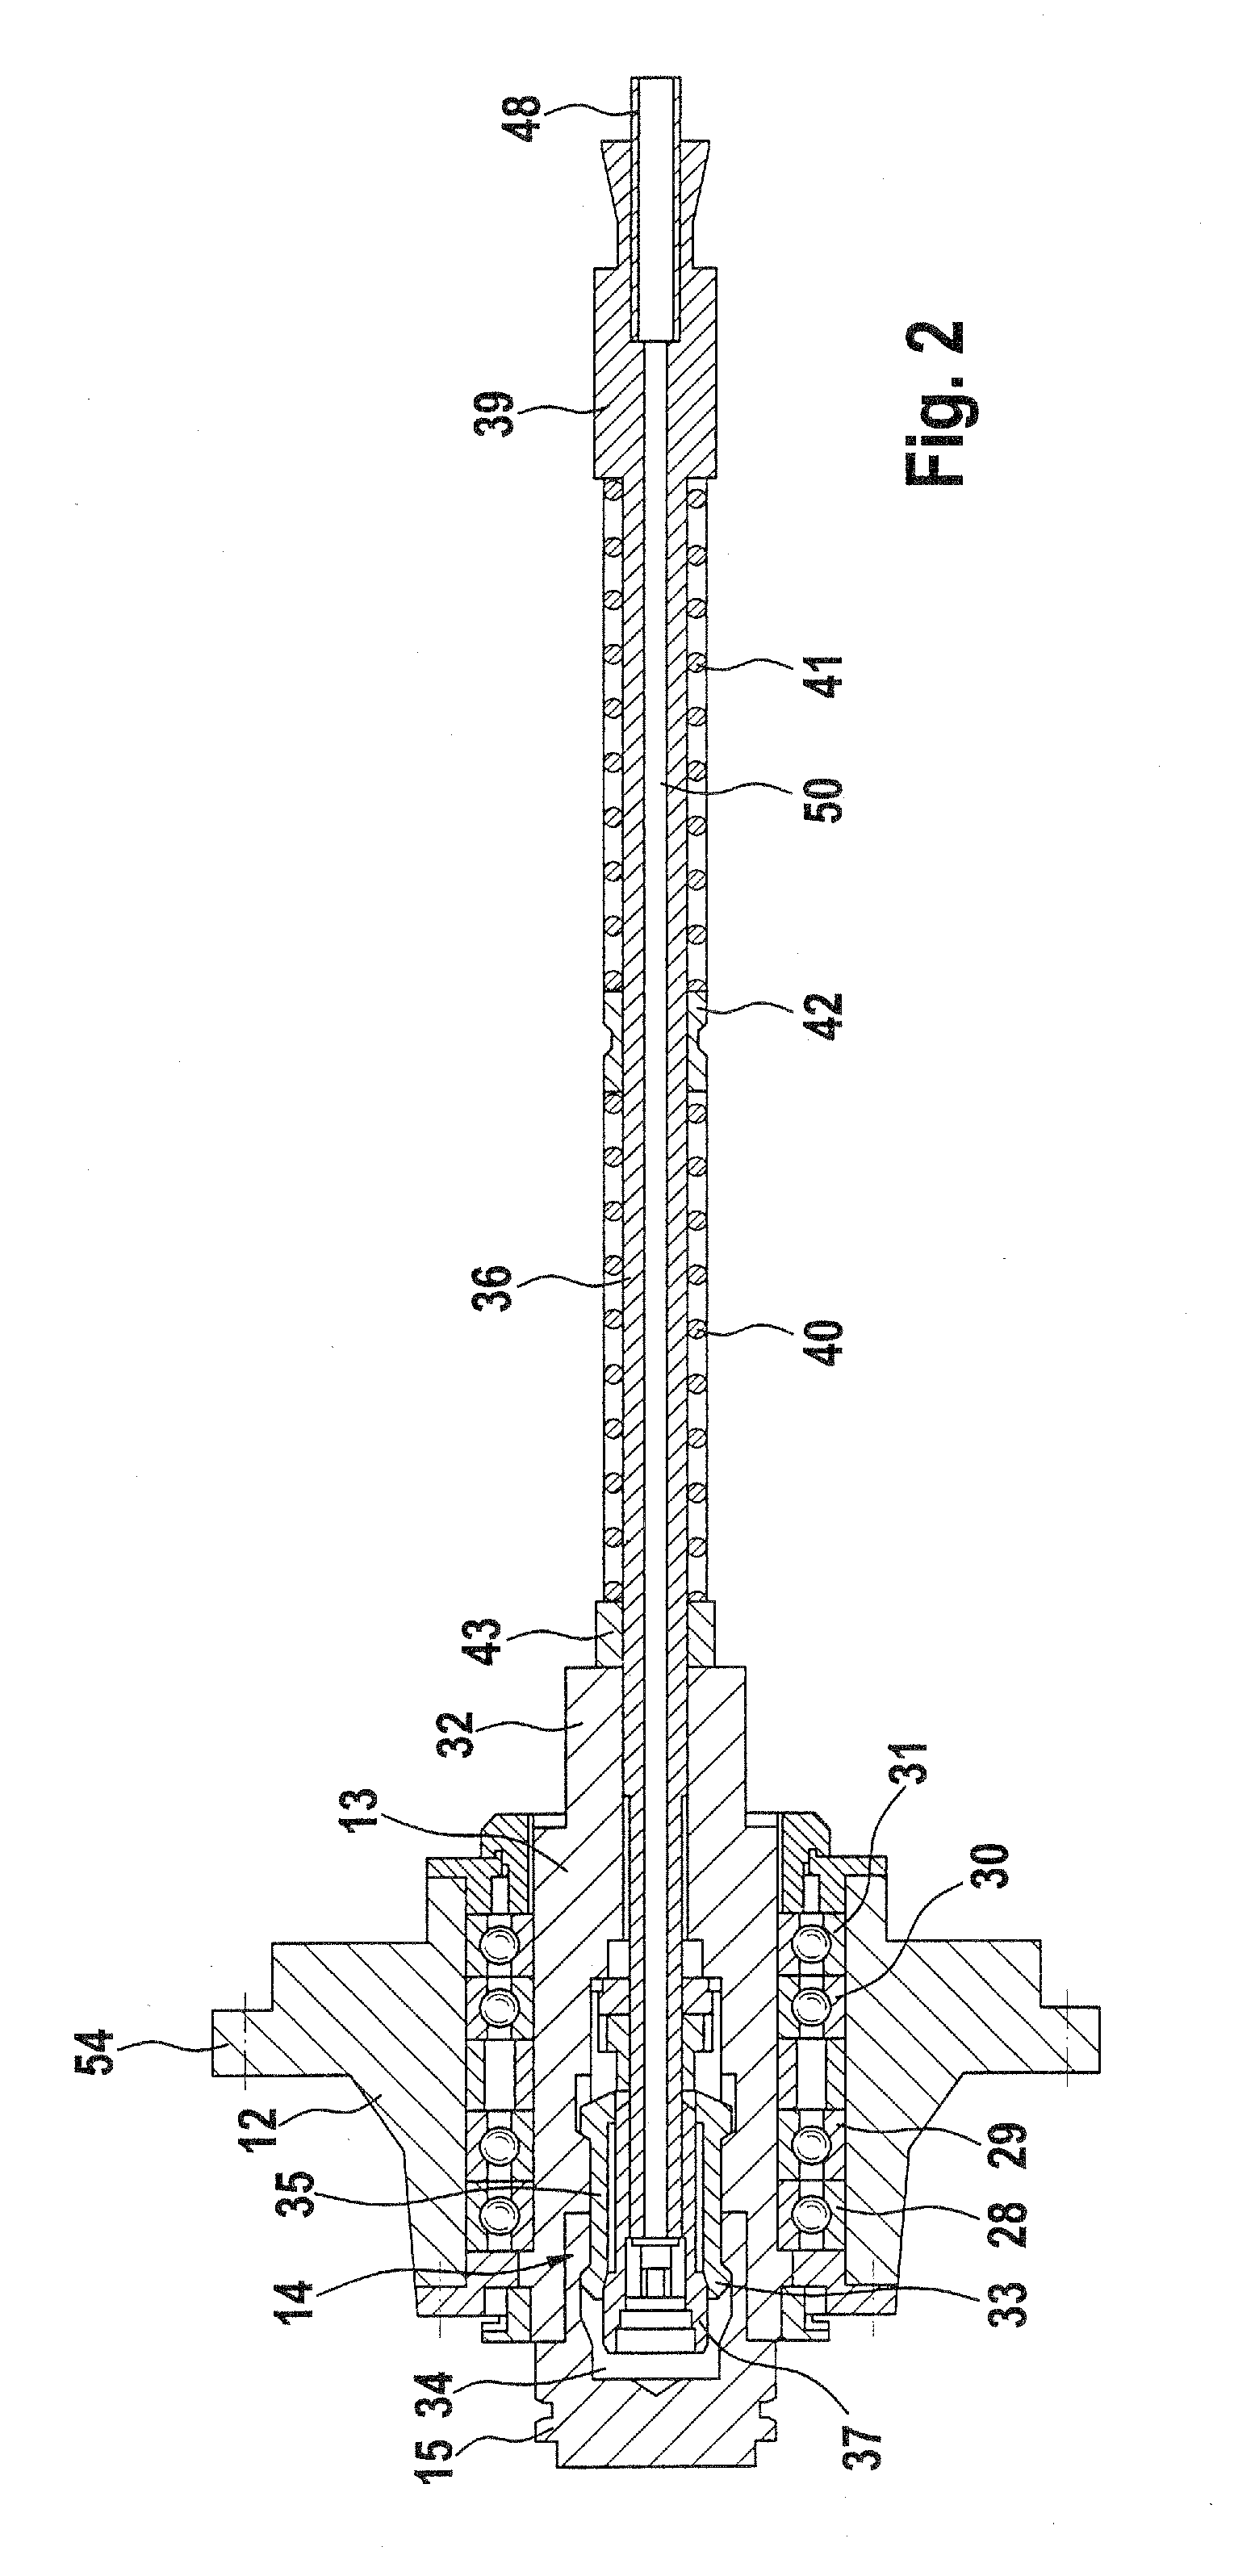 Motor spindle as a rotary drive for tools on a machine tool